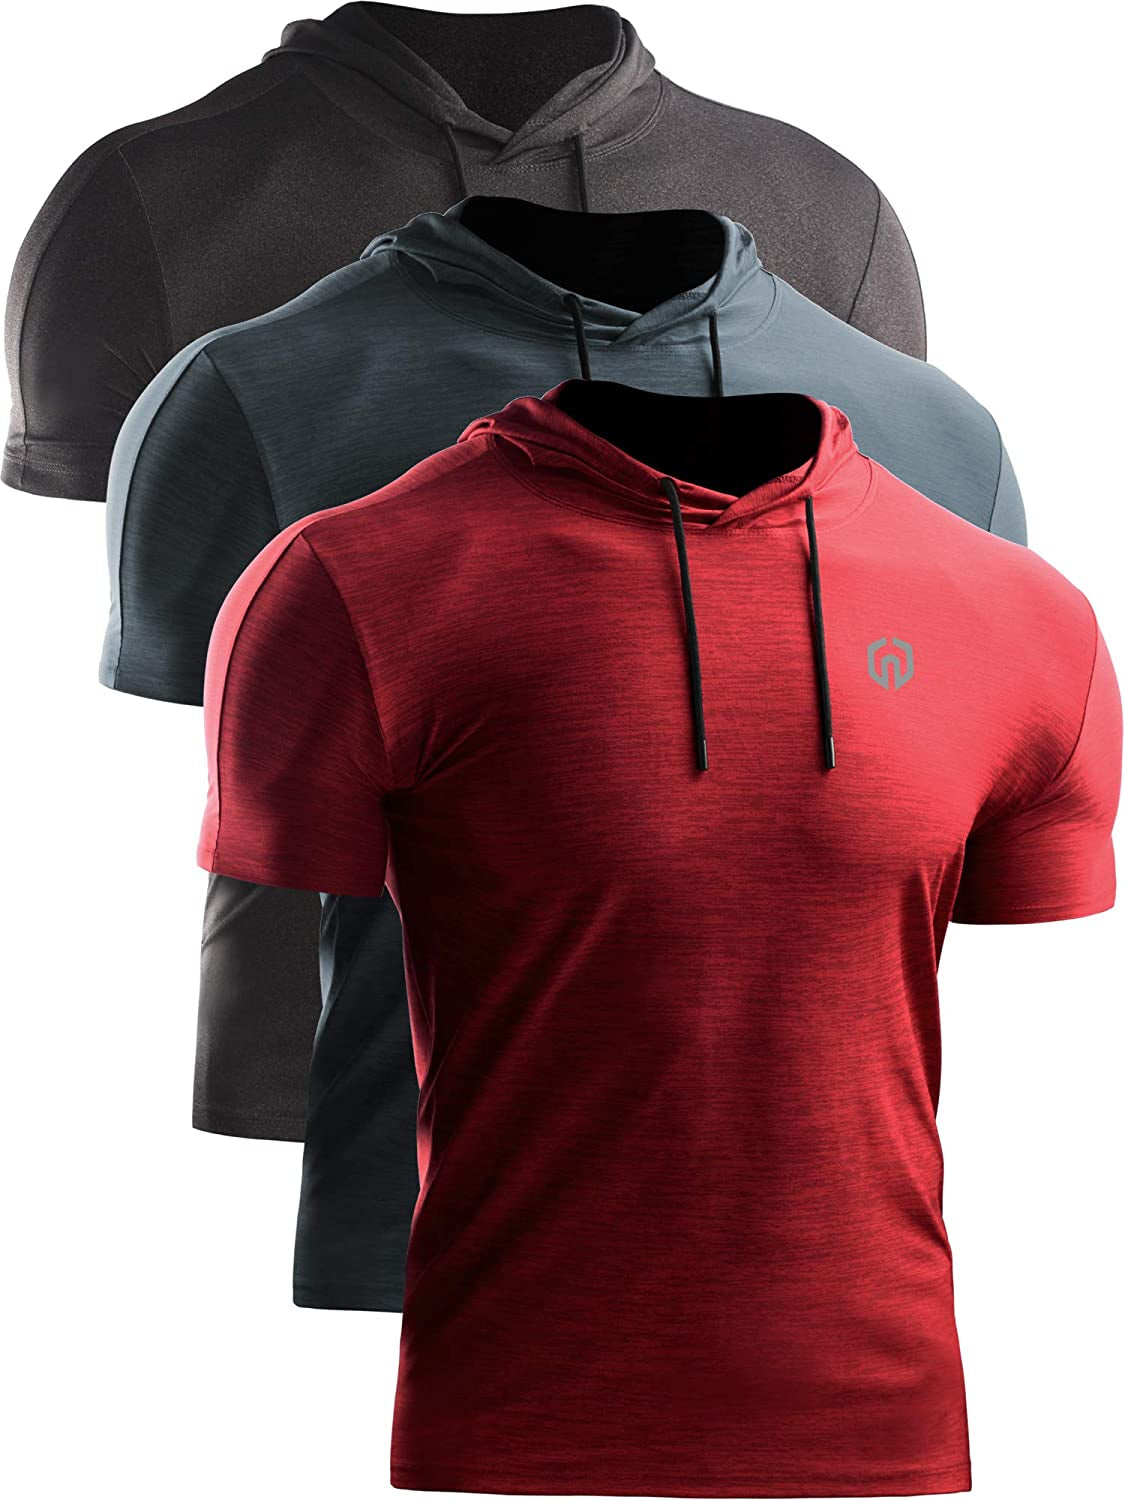 "Enhance Your Comfort and Style with the Men's Dry Fit Performance Athletic Shirt with Hoods!"